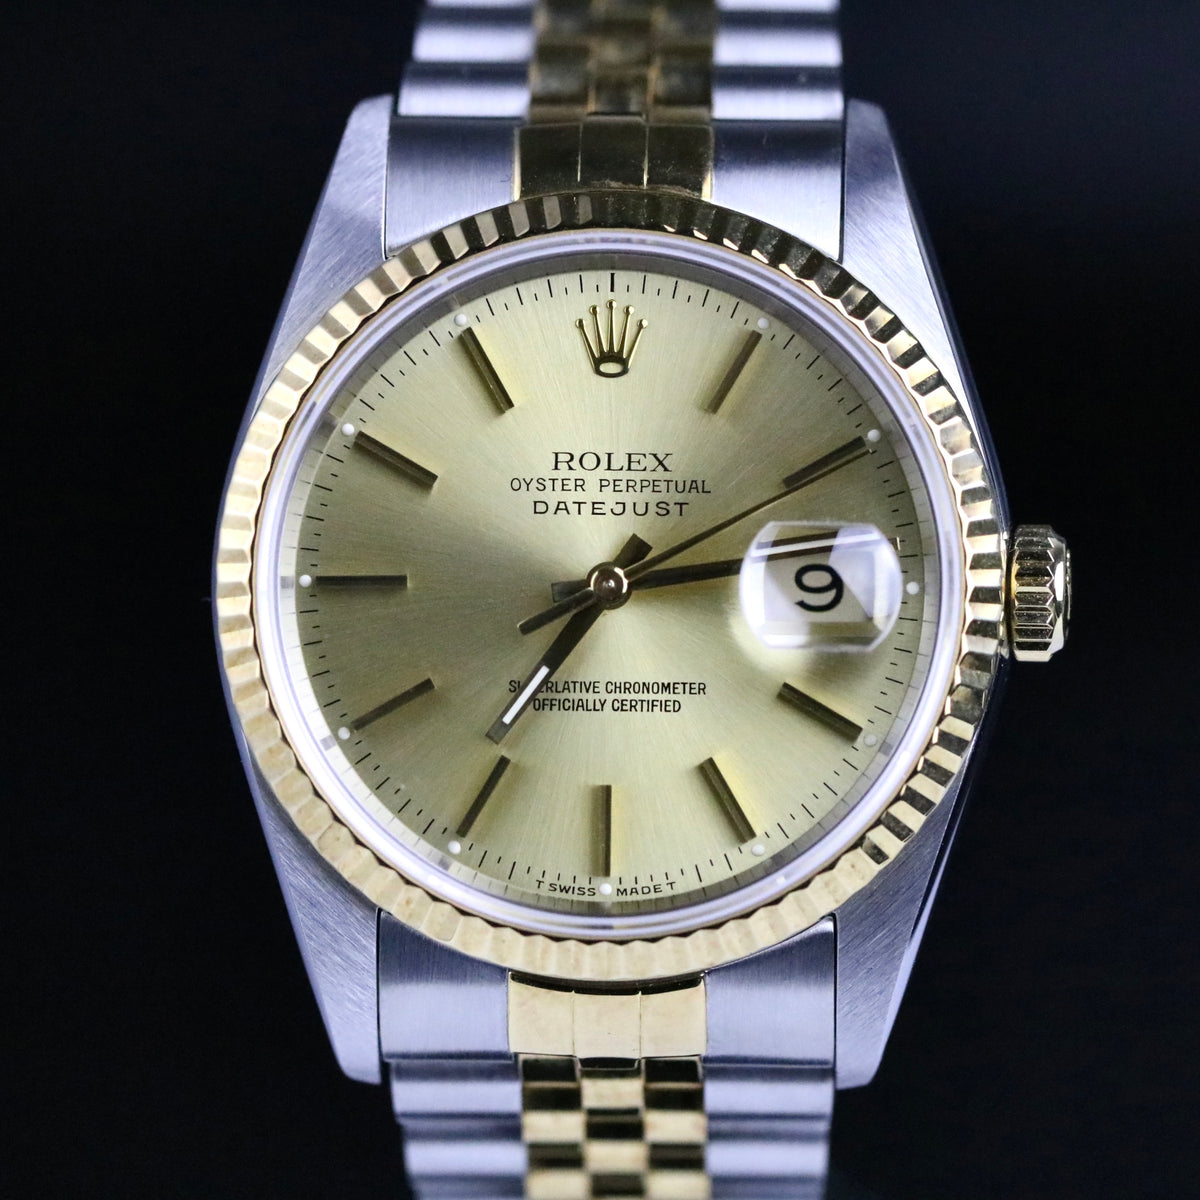 1991 Rolex 16233 Datejust 36mm Tight Bracelet with Box & Papers, RSC